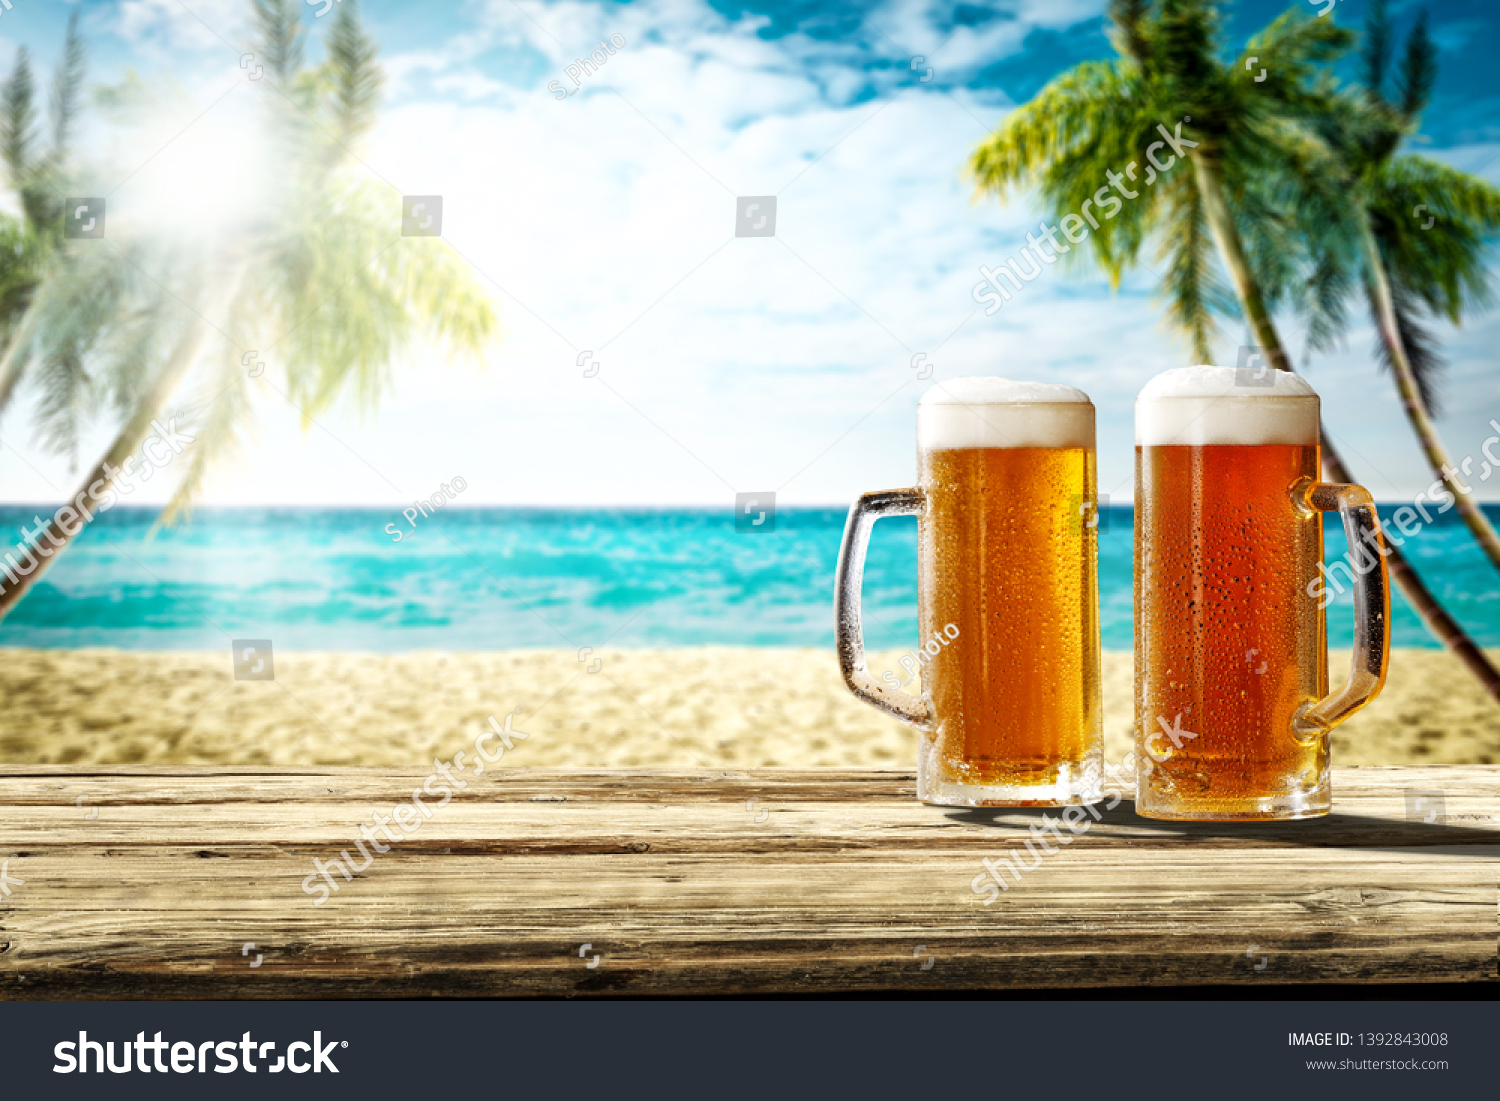 Cold Beer On Wooden Desk Free Stock Photo 1392843008 | Shutterstock